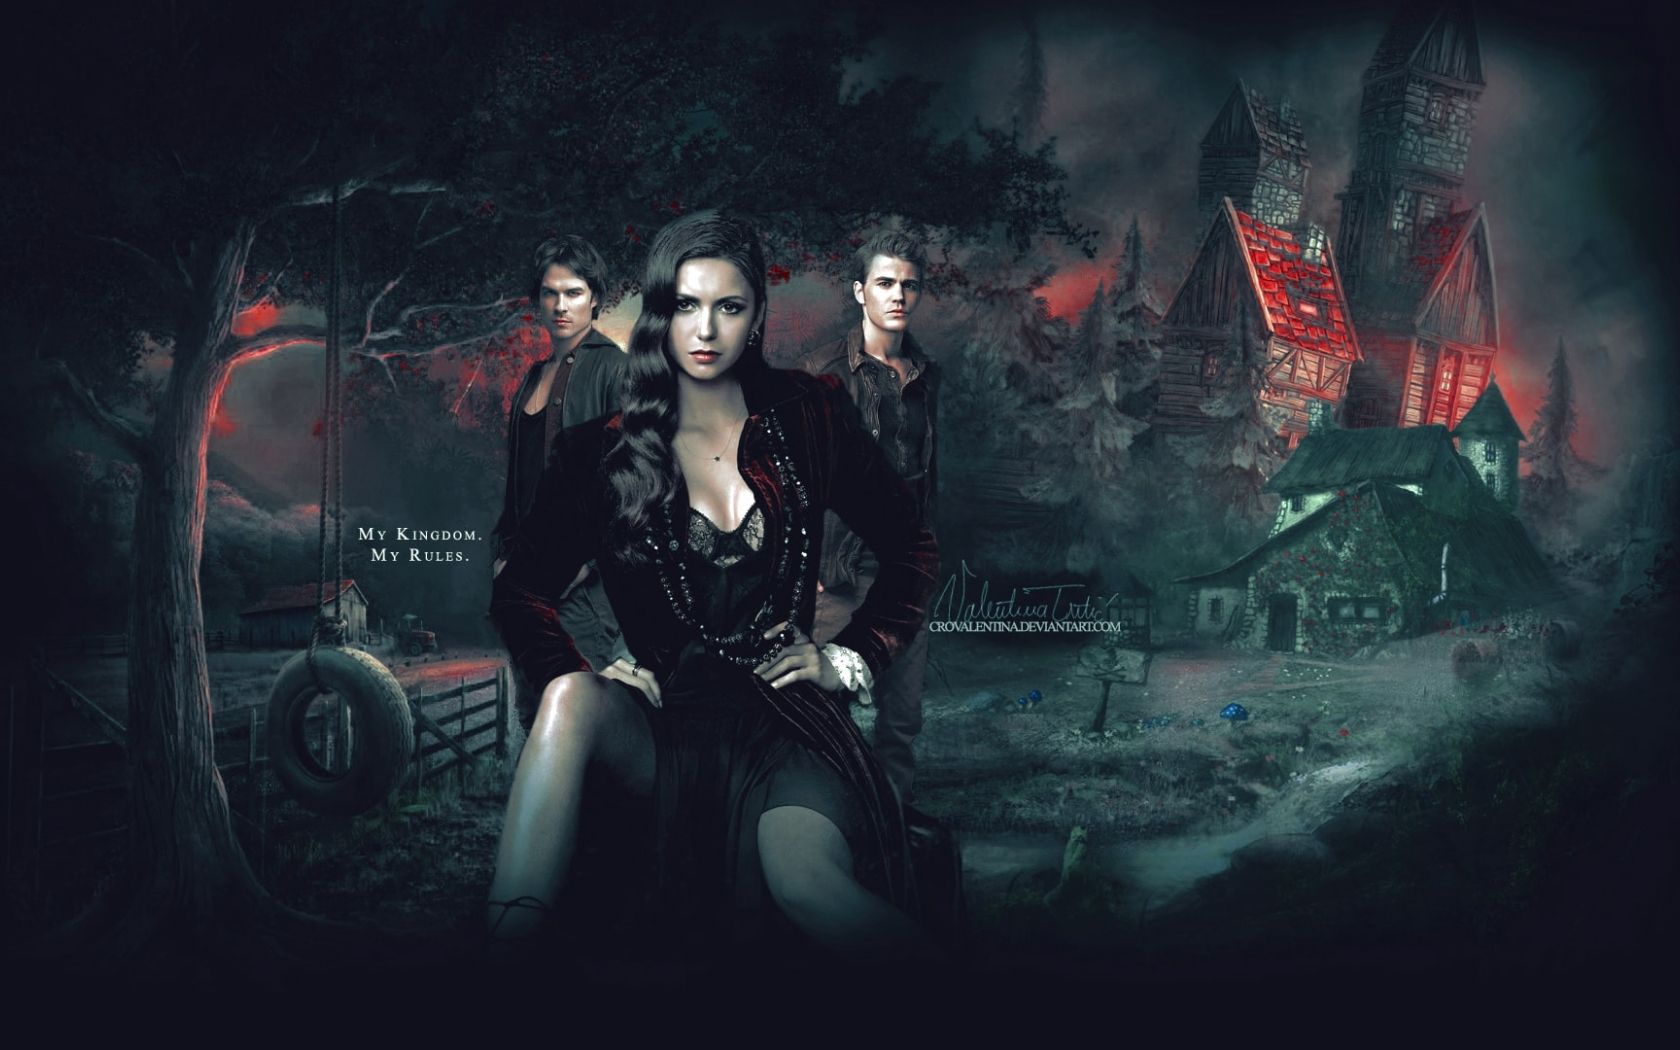 Download Vampire wallpapers for mobile phone, free Vampire HD pictures